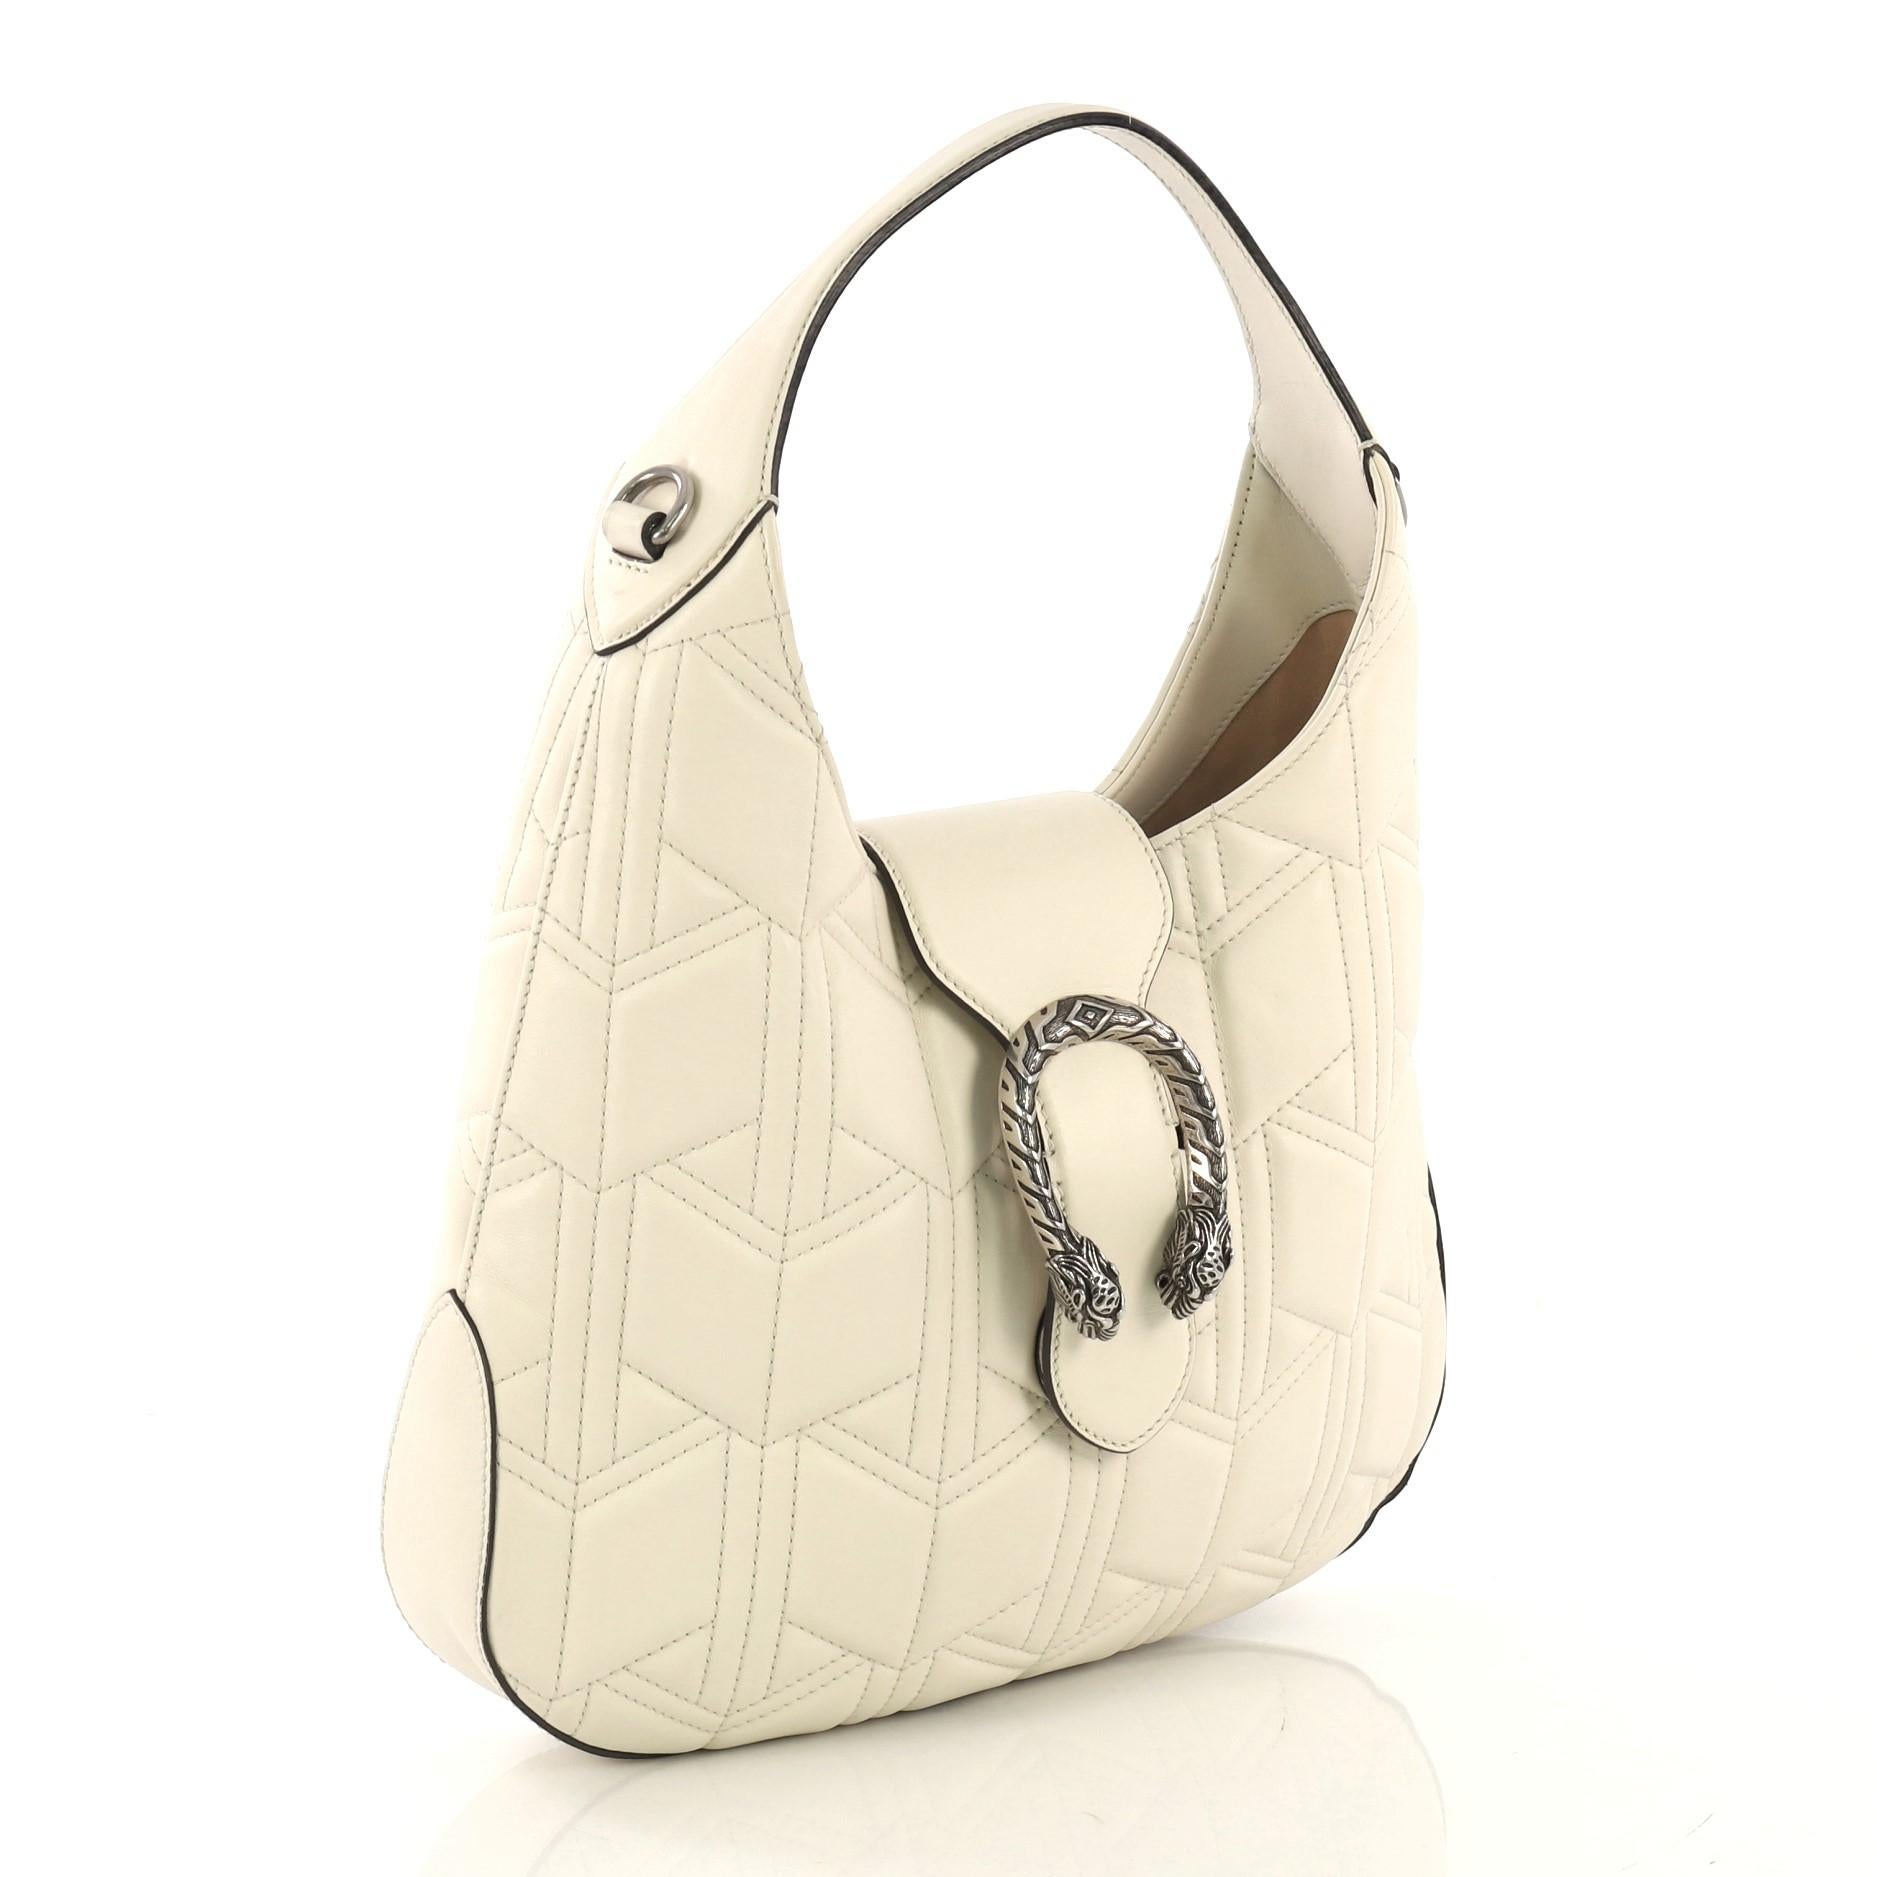 This Gucci Dionysus Hobo Matelasse Leather Small, crafted from off white matelasse leather, features a single loop leather handle, textured tiger head spur detail on its flap tab, and aged silver-tone hardware. It opens to a nude microfiber interior